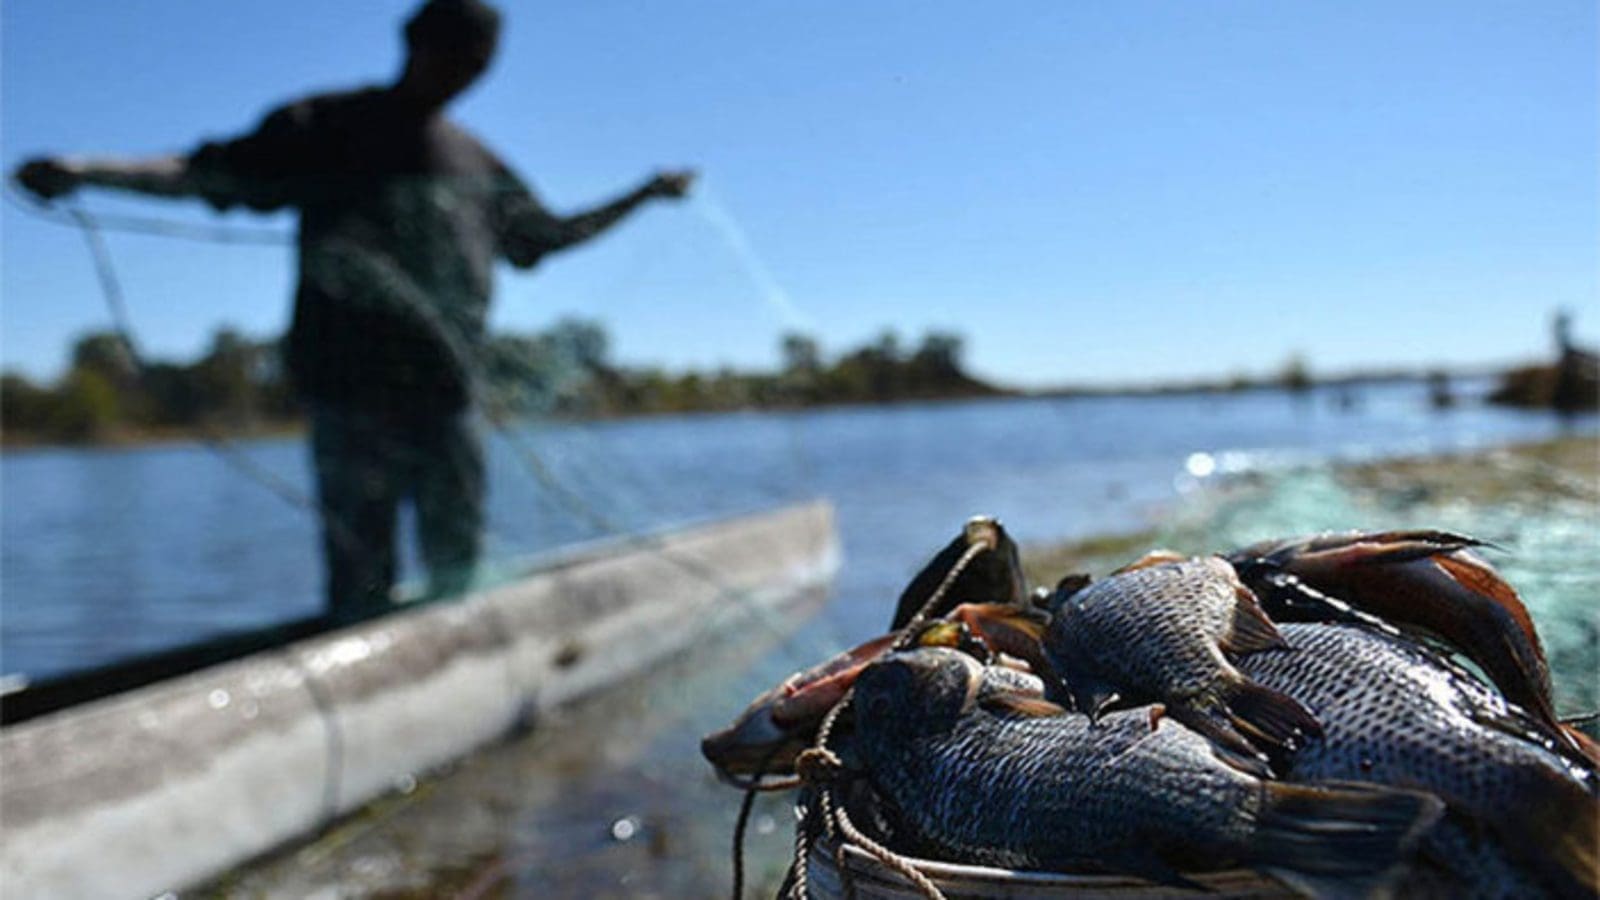 Government issues directive to boost fisheries sector for poverty eradication in Tanzania